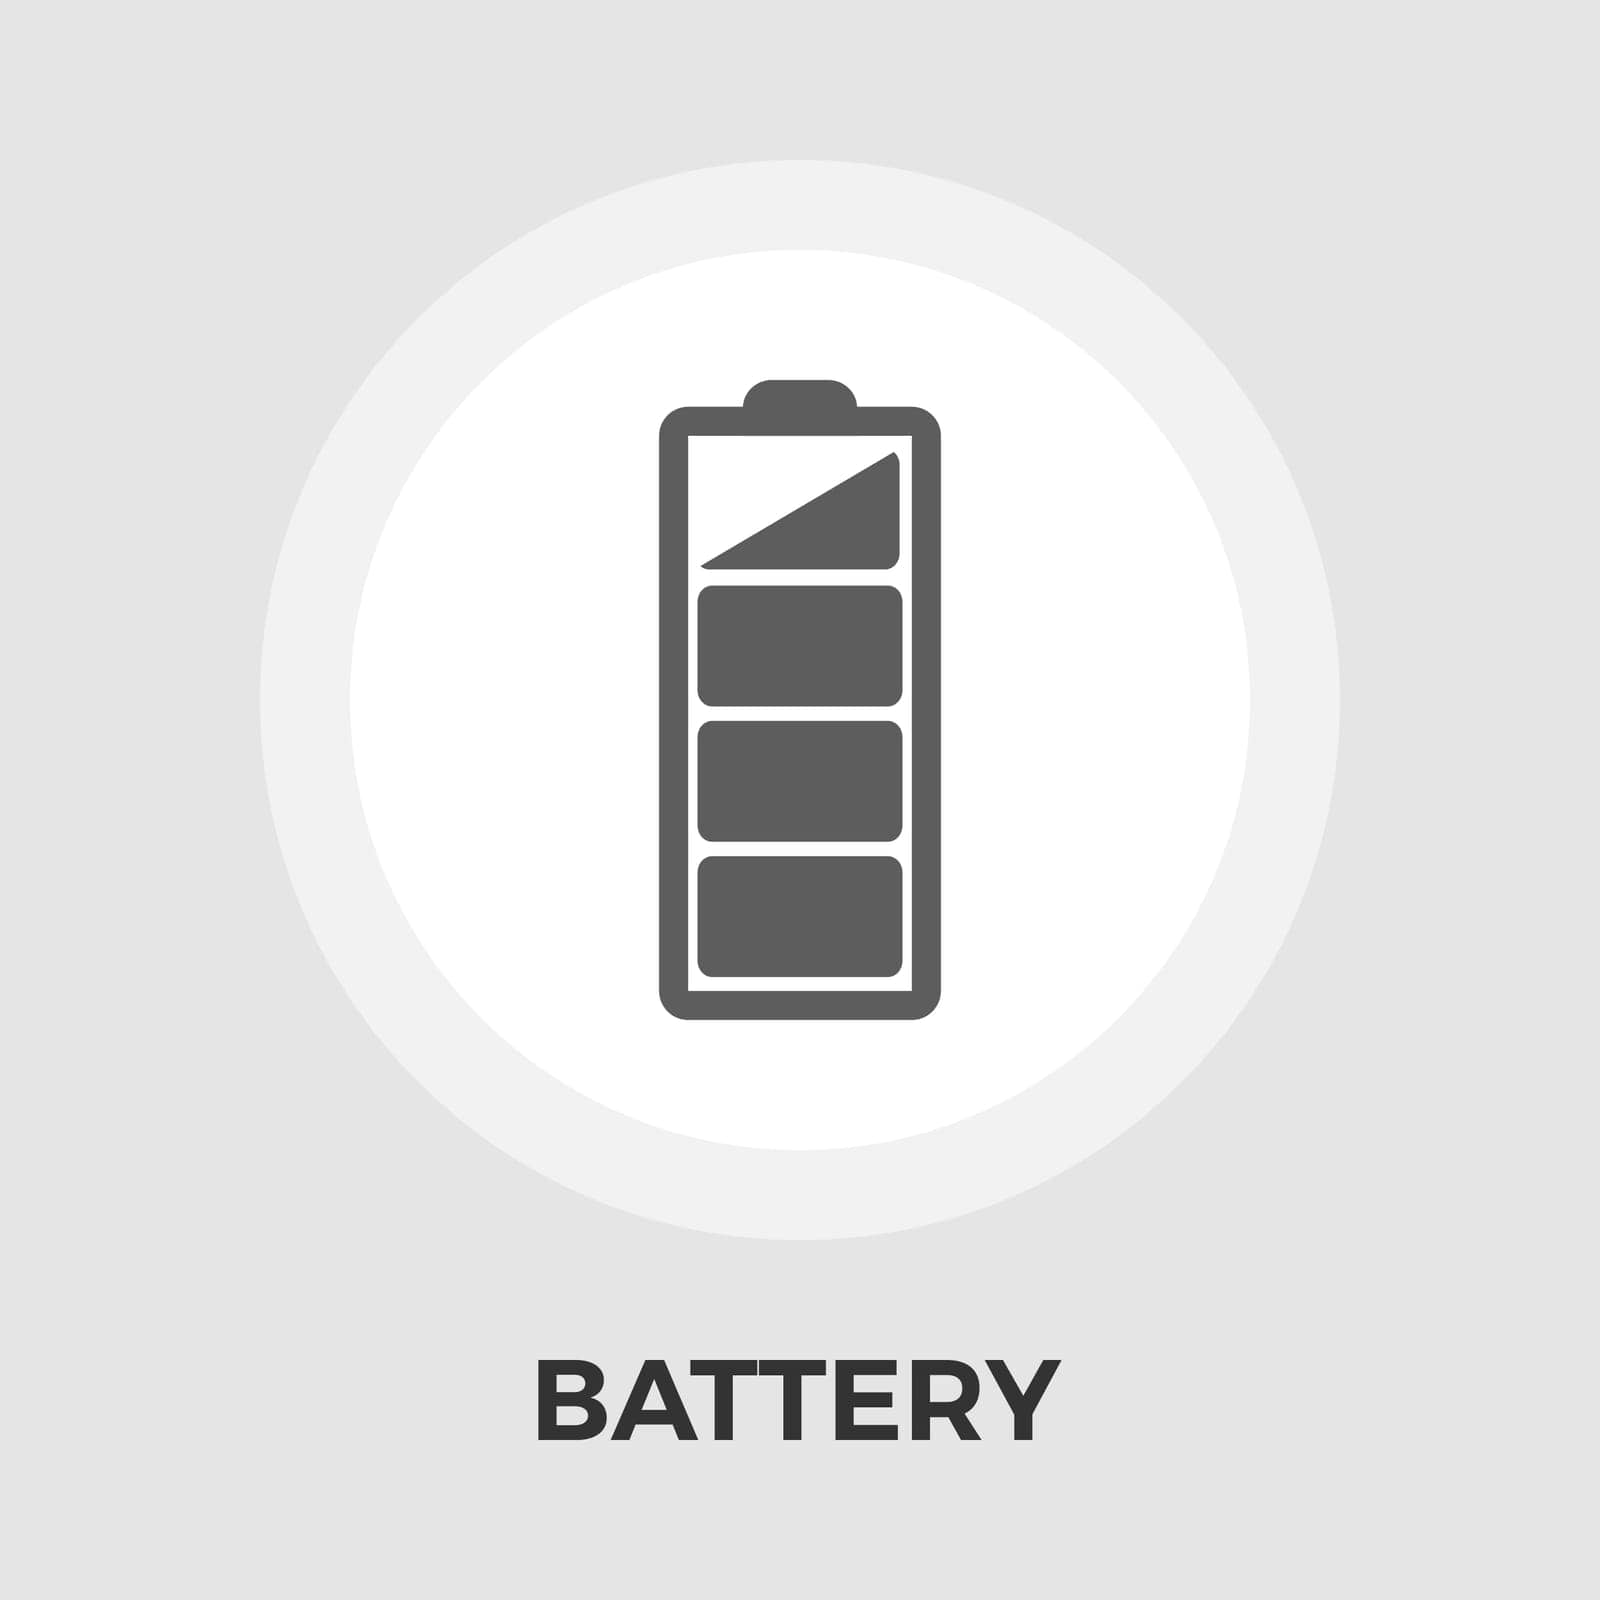 Battery Icon Vector. Battery Icon Flat. Battery Icon Image. Battery Icon JPEG. Battery Icon EPS. Battery Icon JPG. Battery Icon Object. Battery Icon Graphic. Battery Icon Picture.